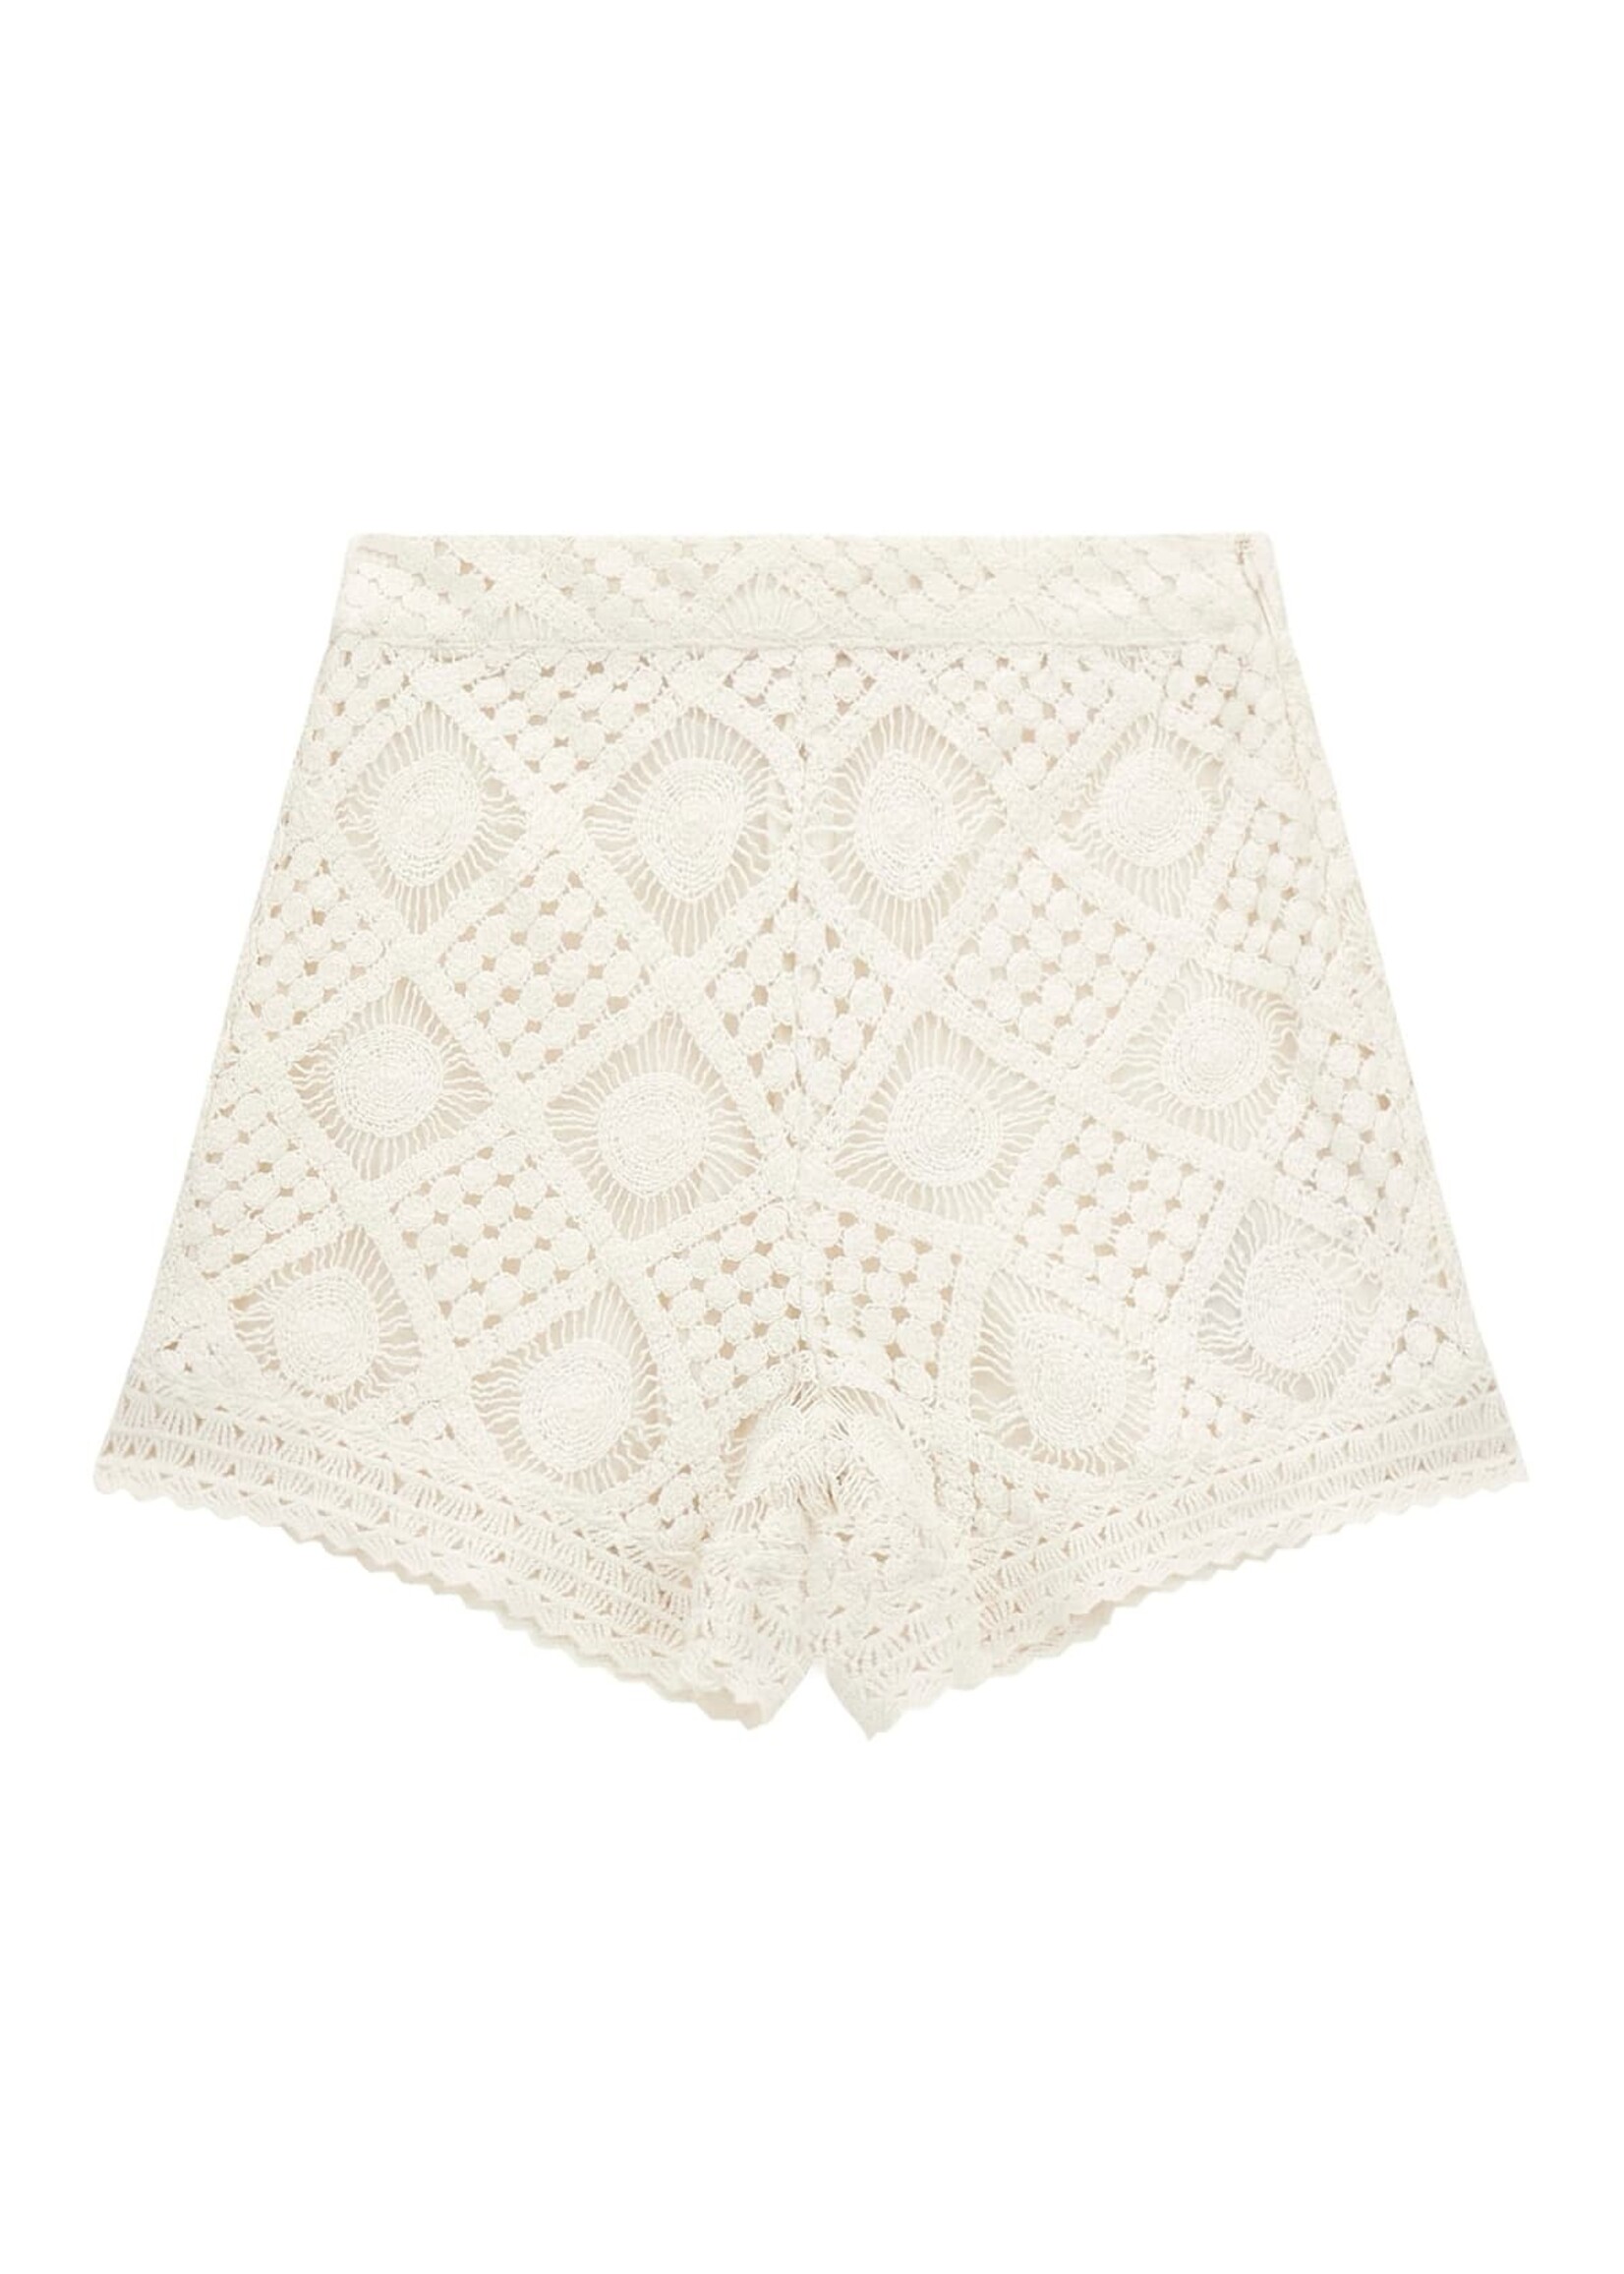 Guess J4GD10 LACE SHORT CREAM WHITE